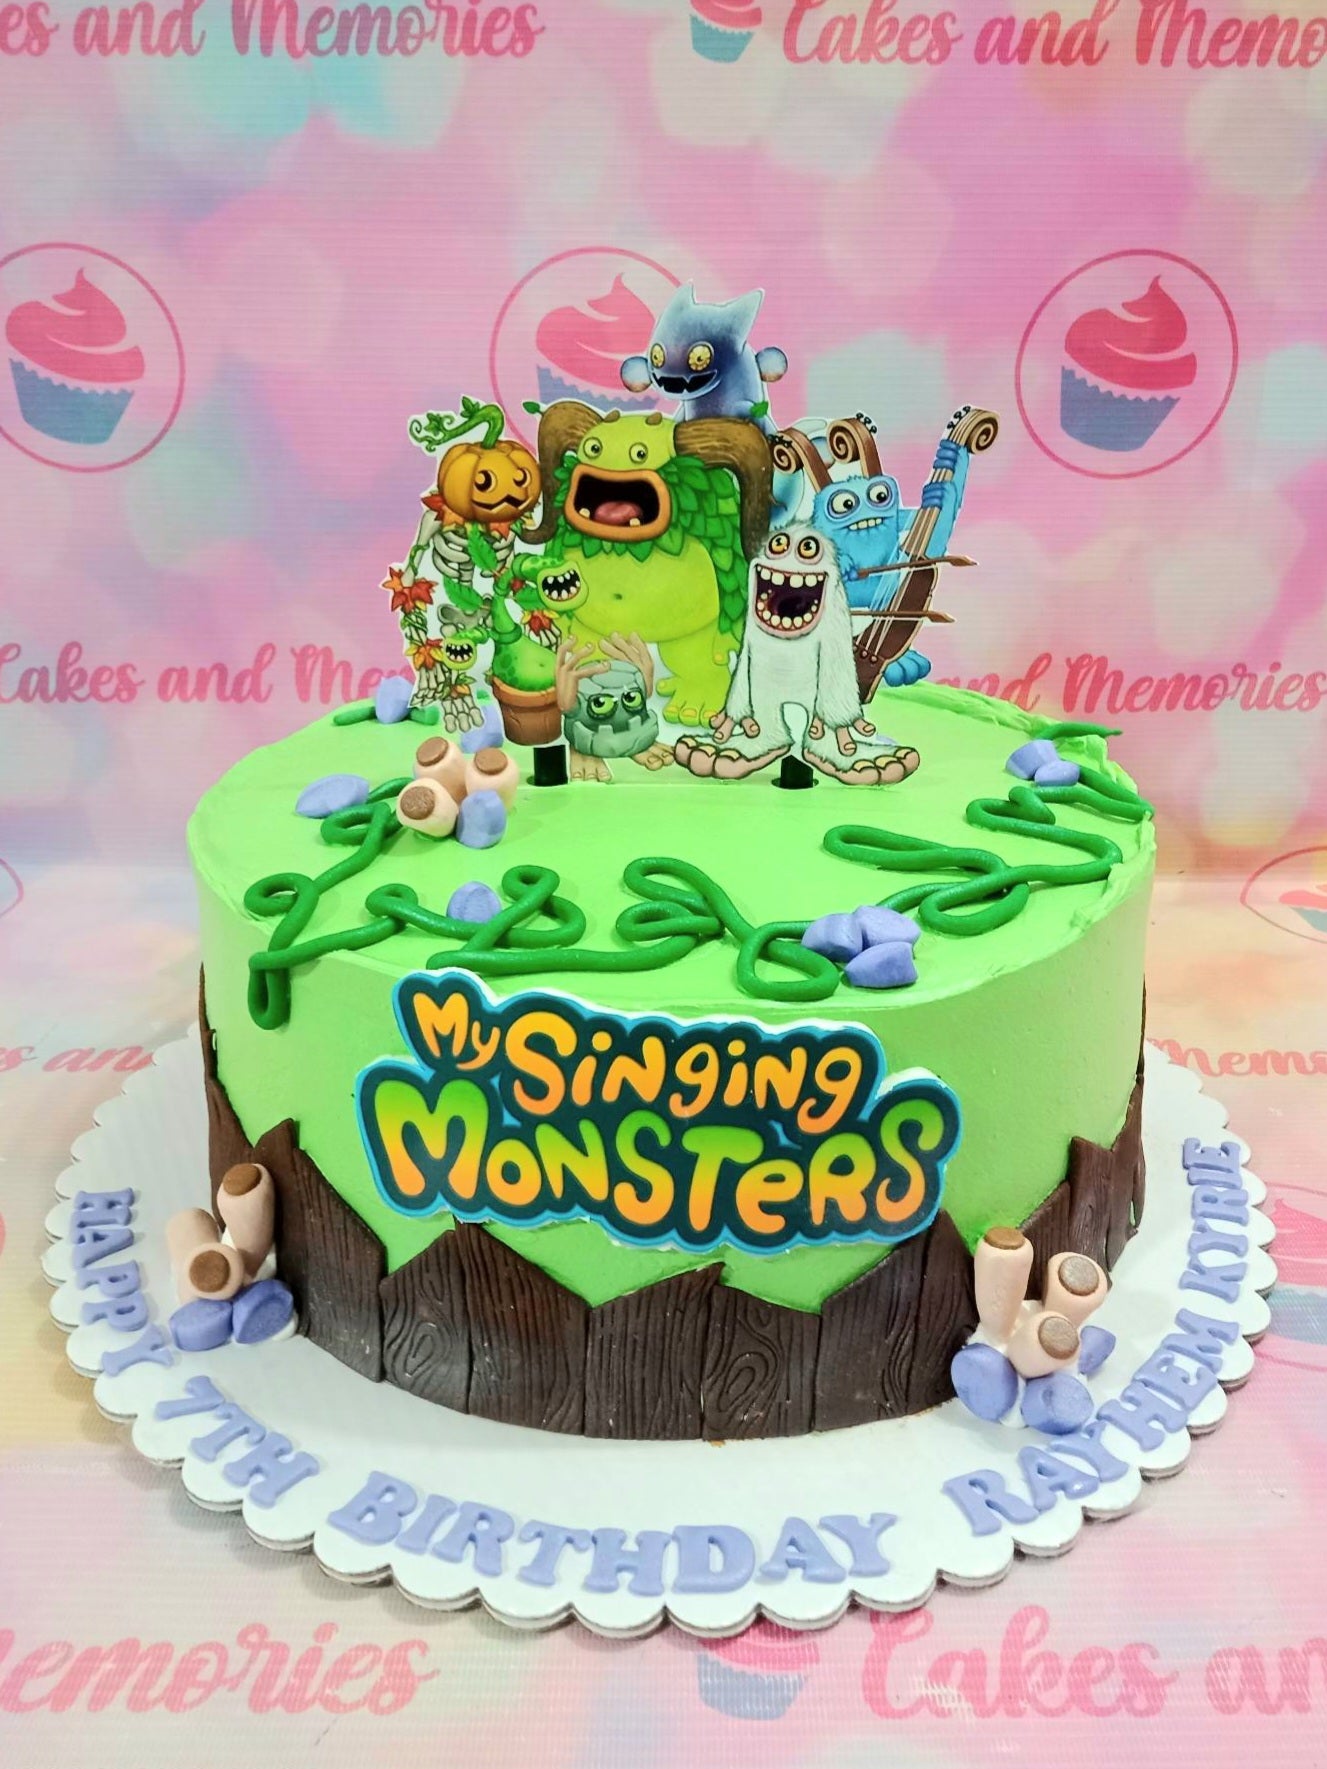 This custom-made Monsters Cake is perfect for a Monsters Inc. or Pixar themed birthday. Featuring vivid green and brown hues, the cake showcases 3D animation of your favorite singing monsters. Perfect for any Monsters Inc. fan, this cake will make the special day even more memorable.